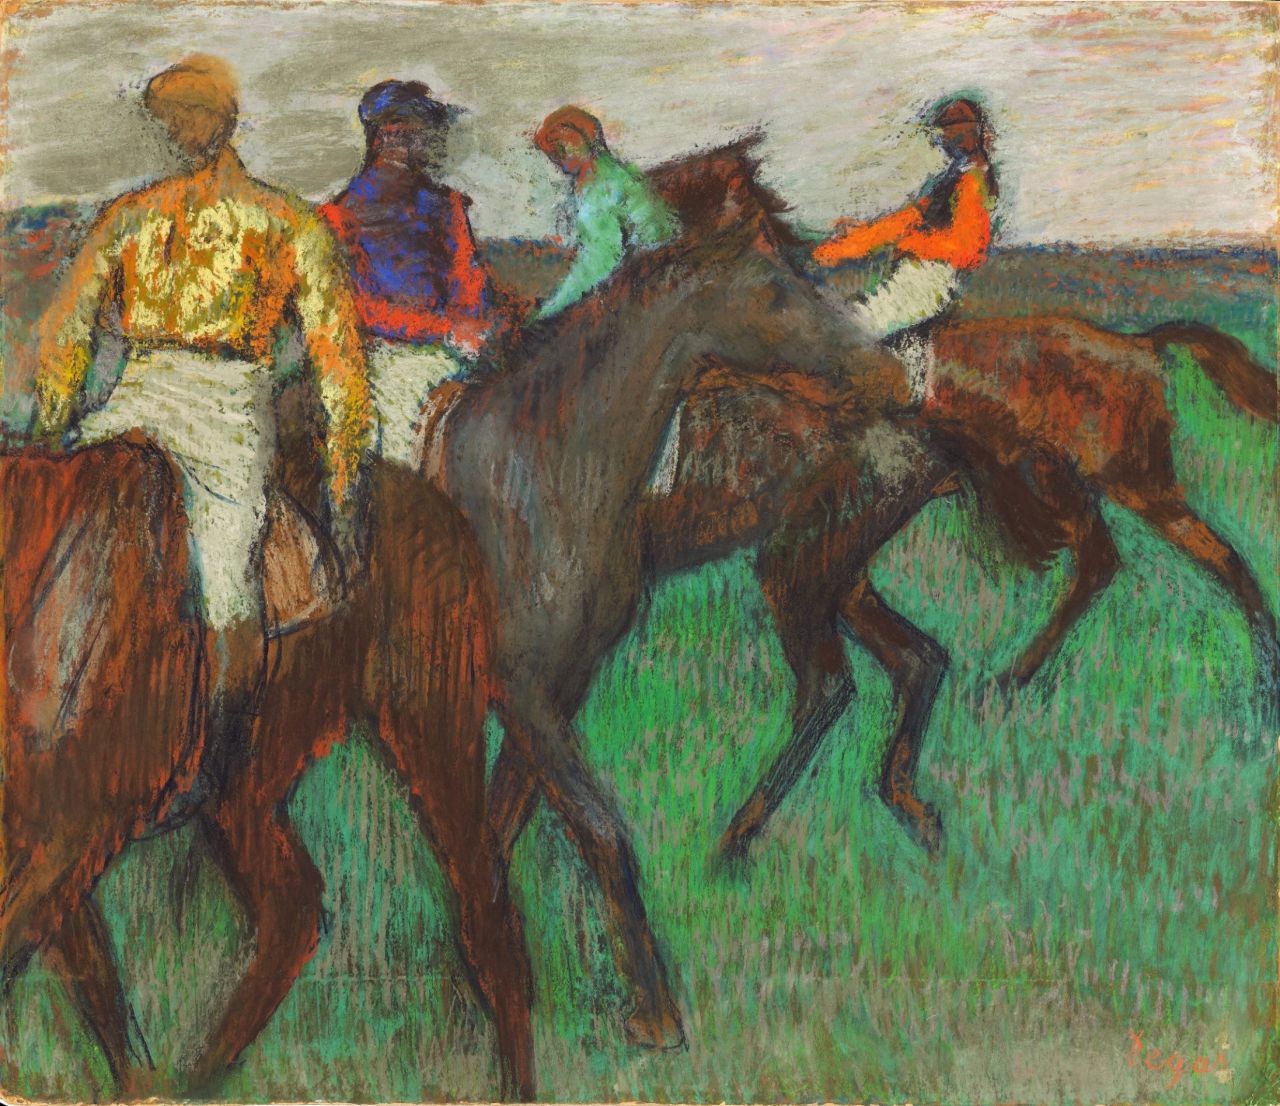 Impressionist paint Edgar Degas was a huge admirer of the horse -- as seen with this work, "Race Horses."